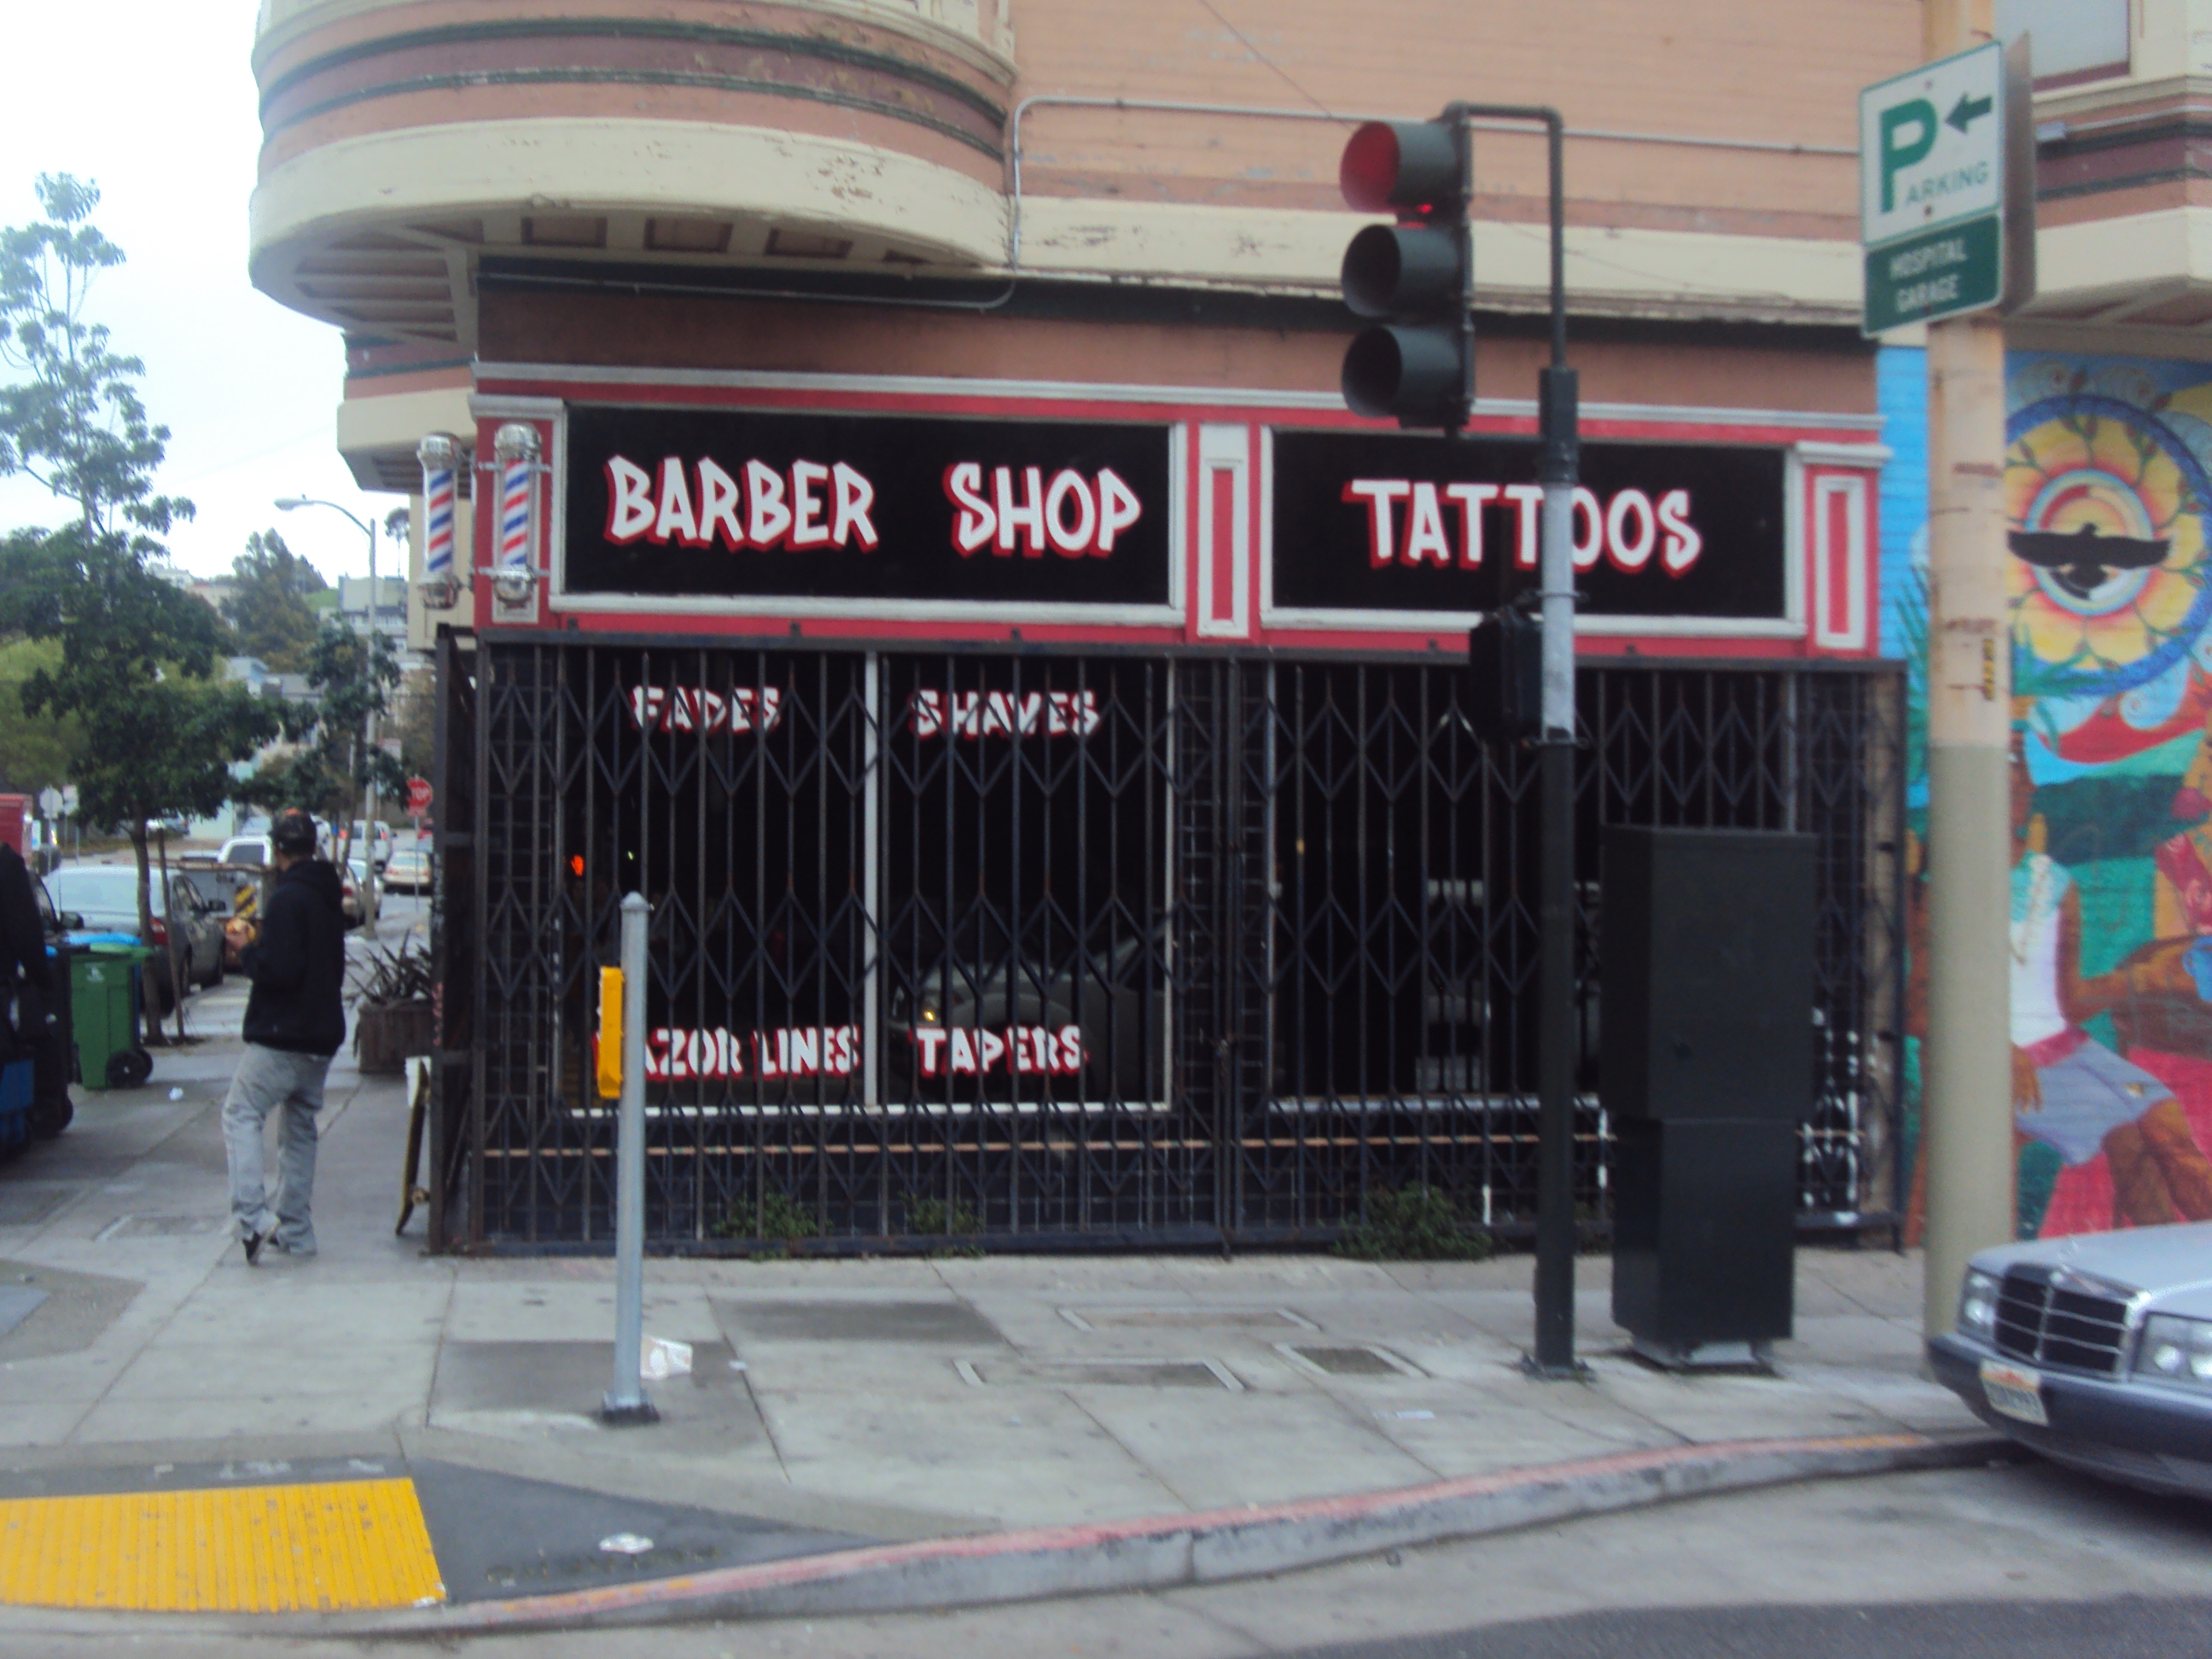 Alright, This is a Tattoo Shop